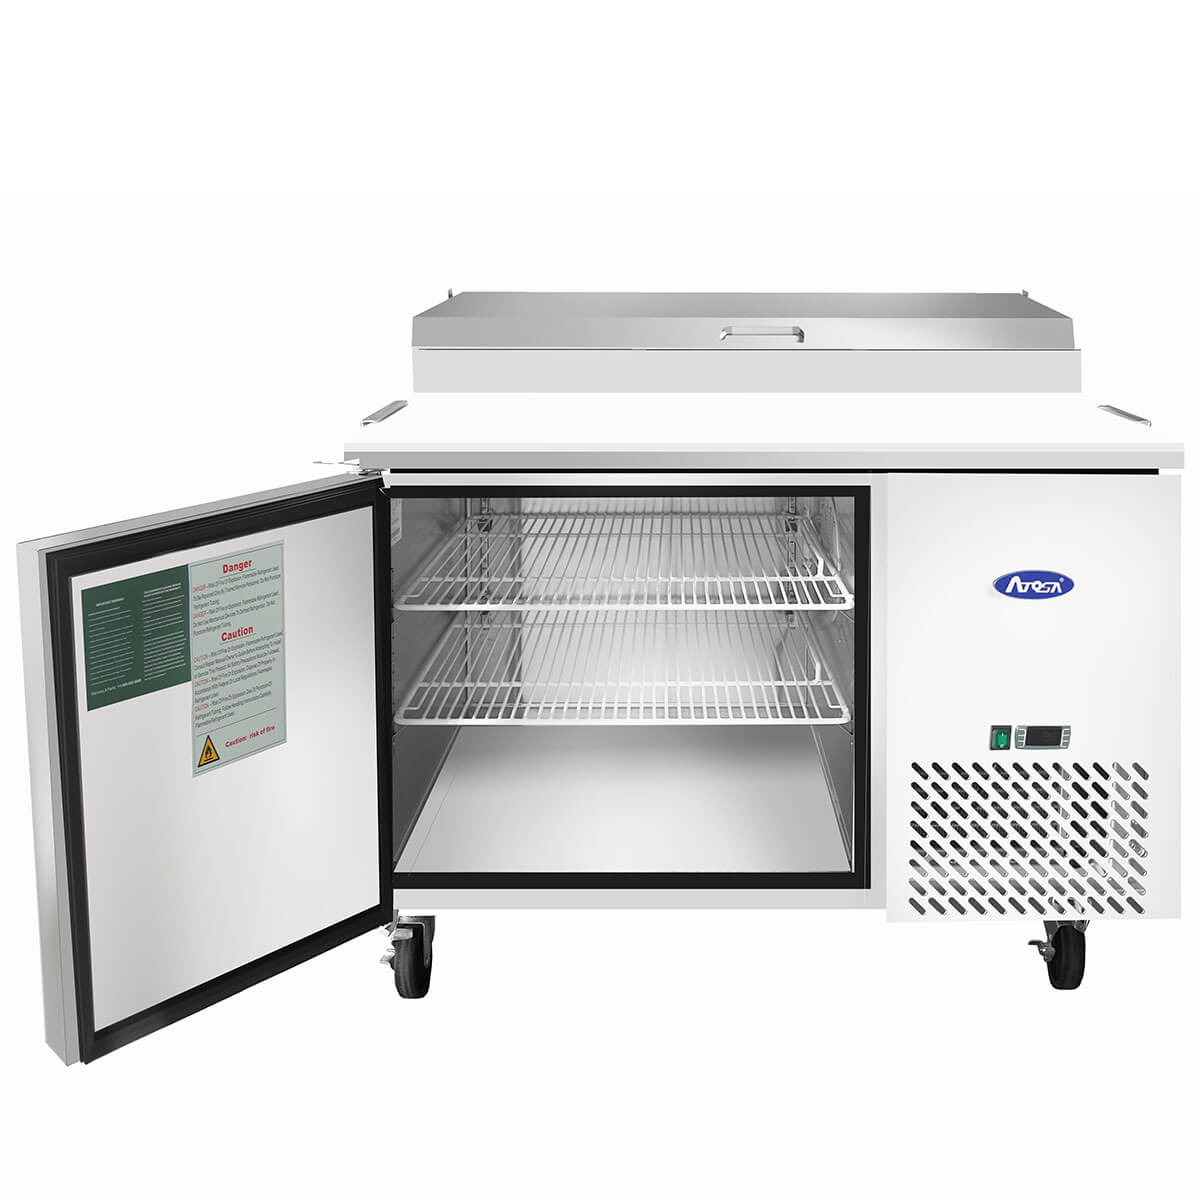 MPF8201GR 44″ Refrigerated Pizza Prep Table open door